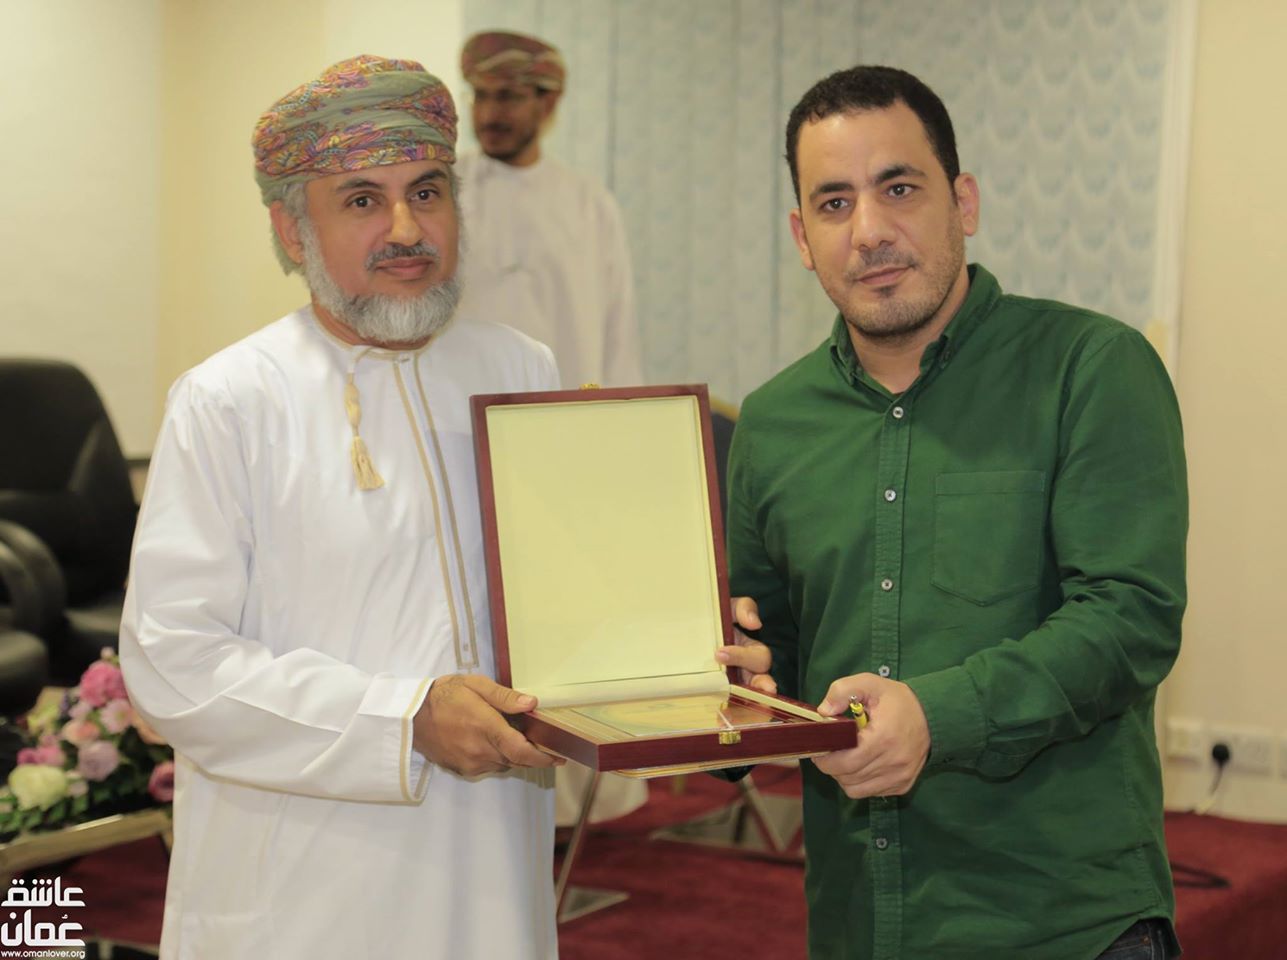 Recognition and award in a Forum on Extremism in Muscat, Omar. He presented a paper entitled “Extremism in Combating Extremism”